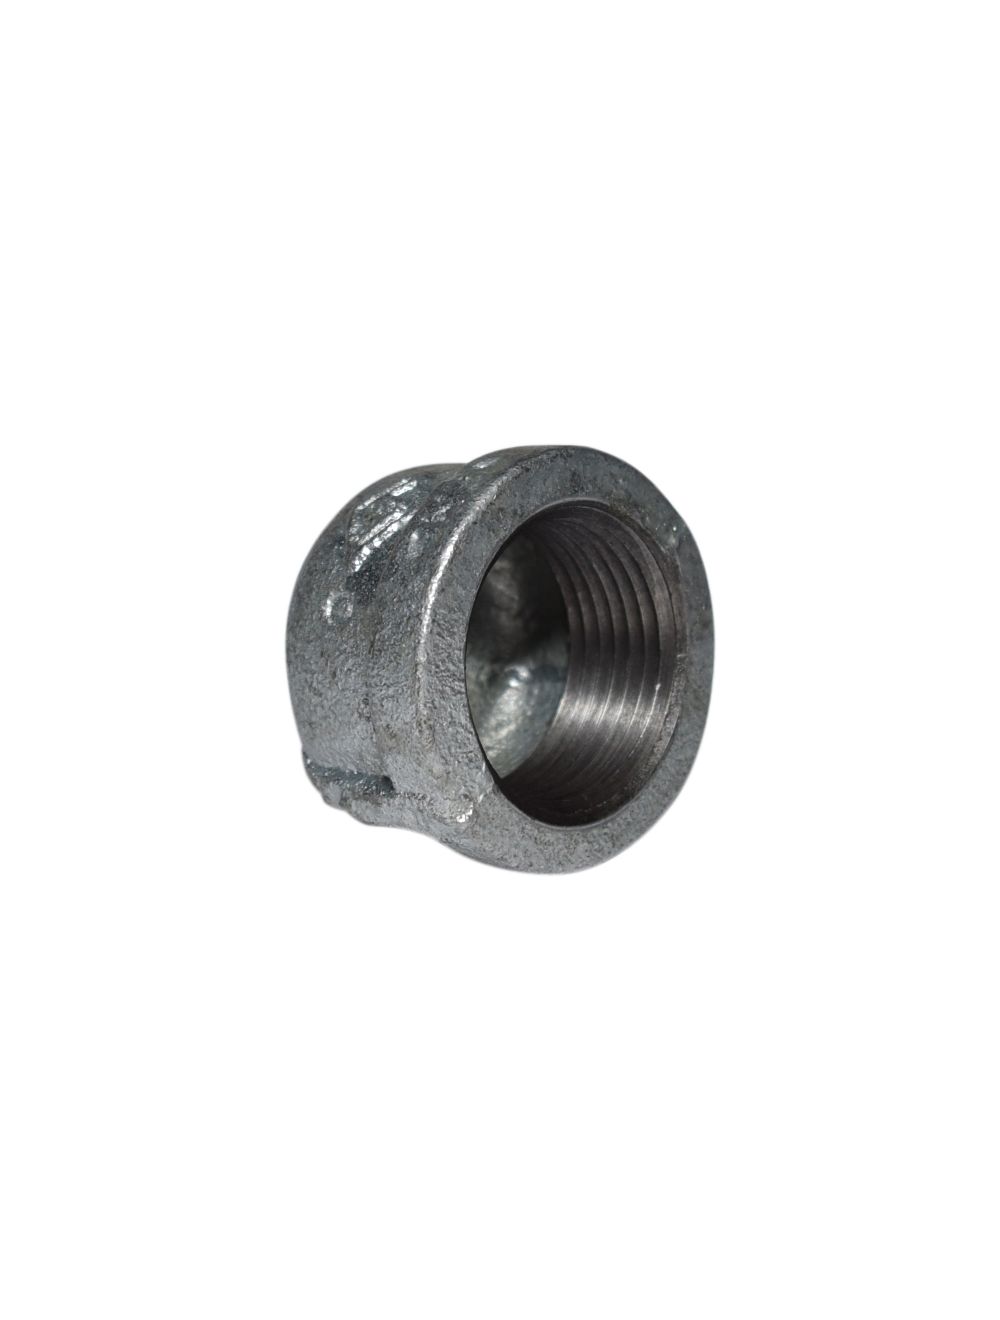 5 1-1/2" Threaded Black Malleable Iron Pipe Cap Fitting 1 1/2'' BLK CAP 